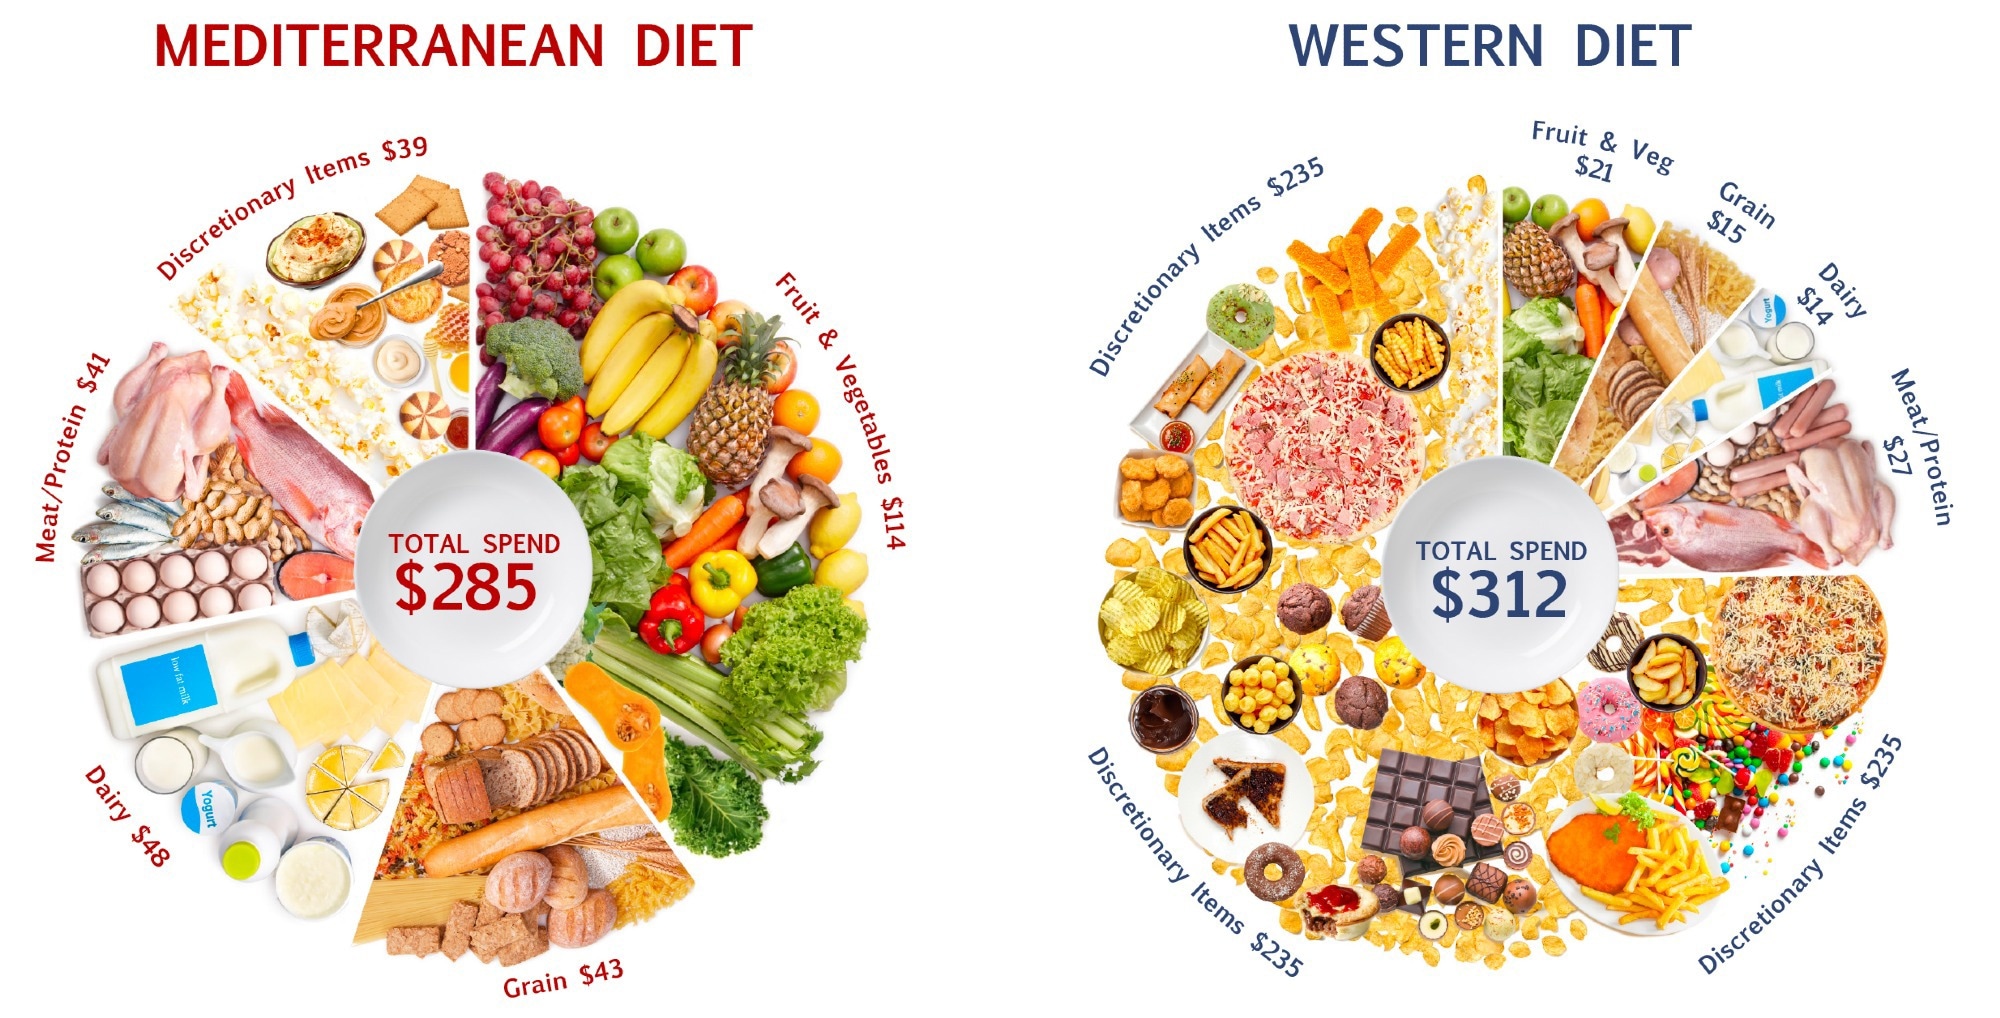 Mediterranean diet shown to be good for health and also the weekly budget